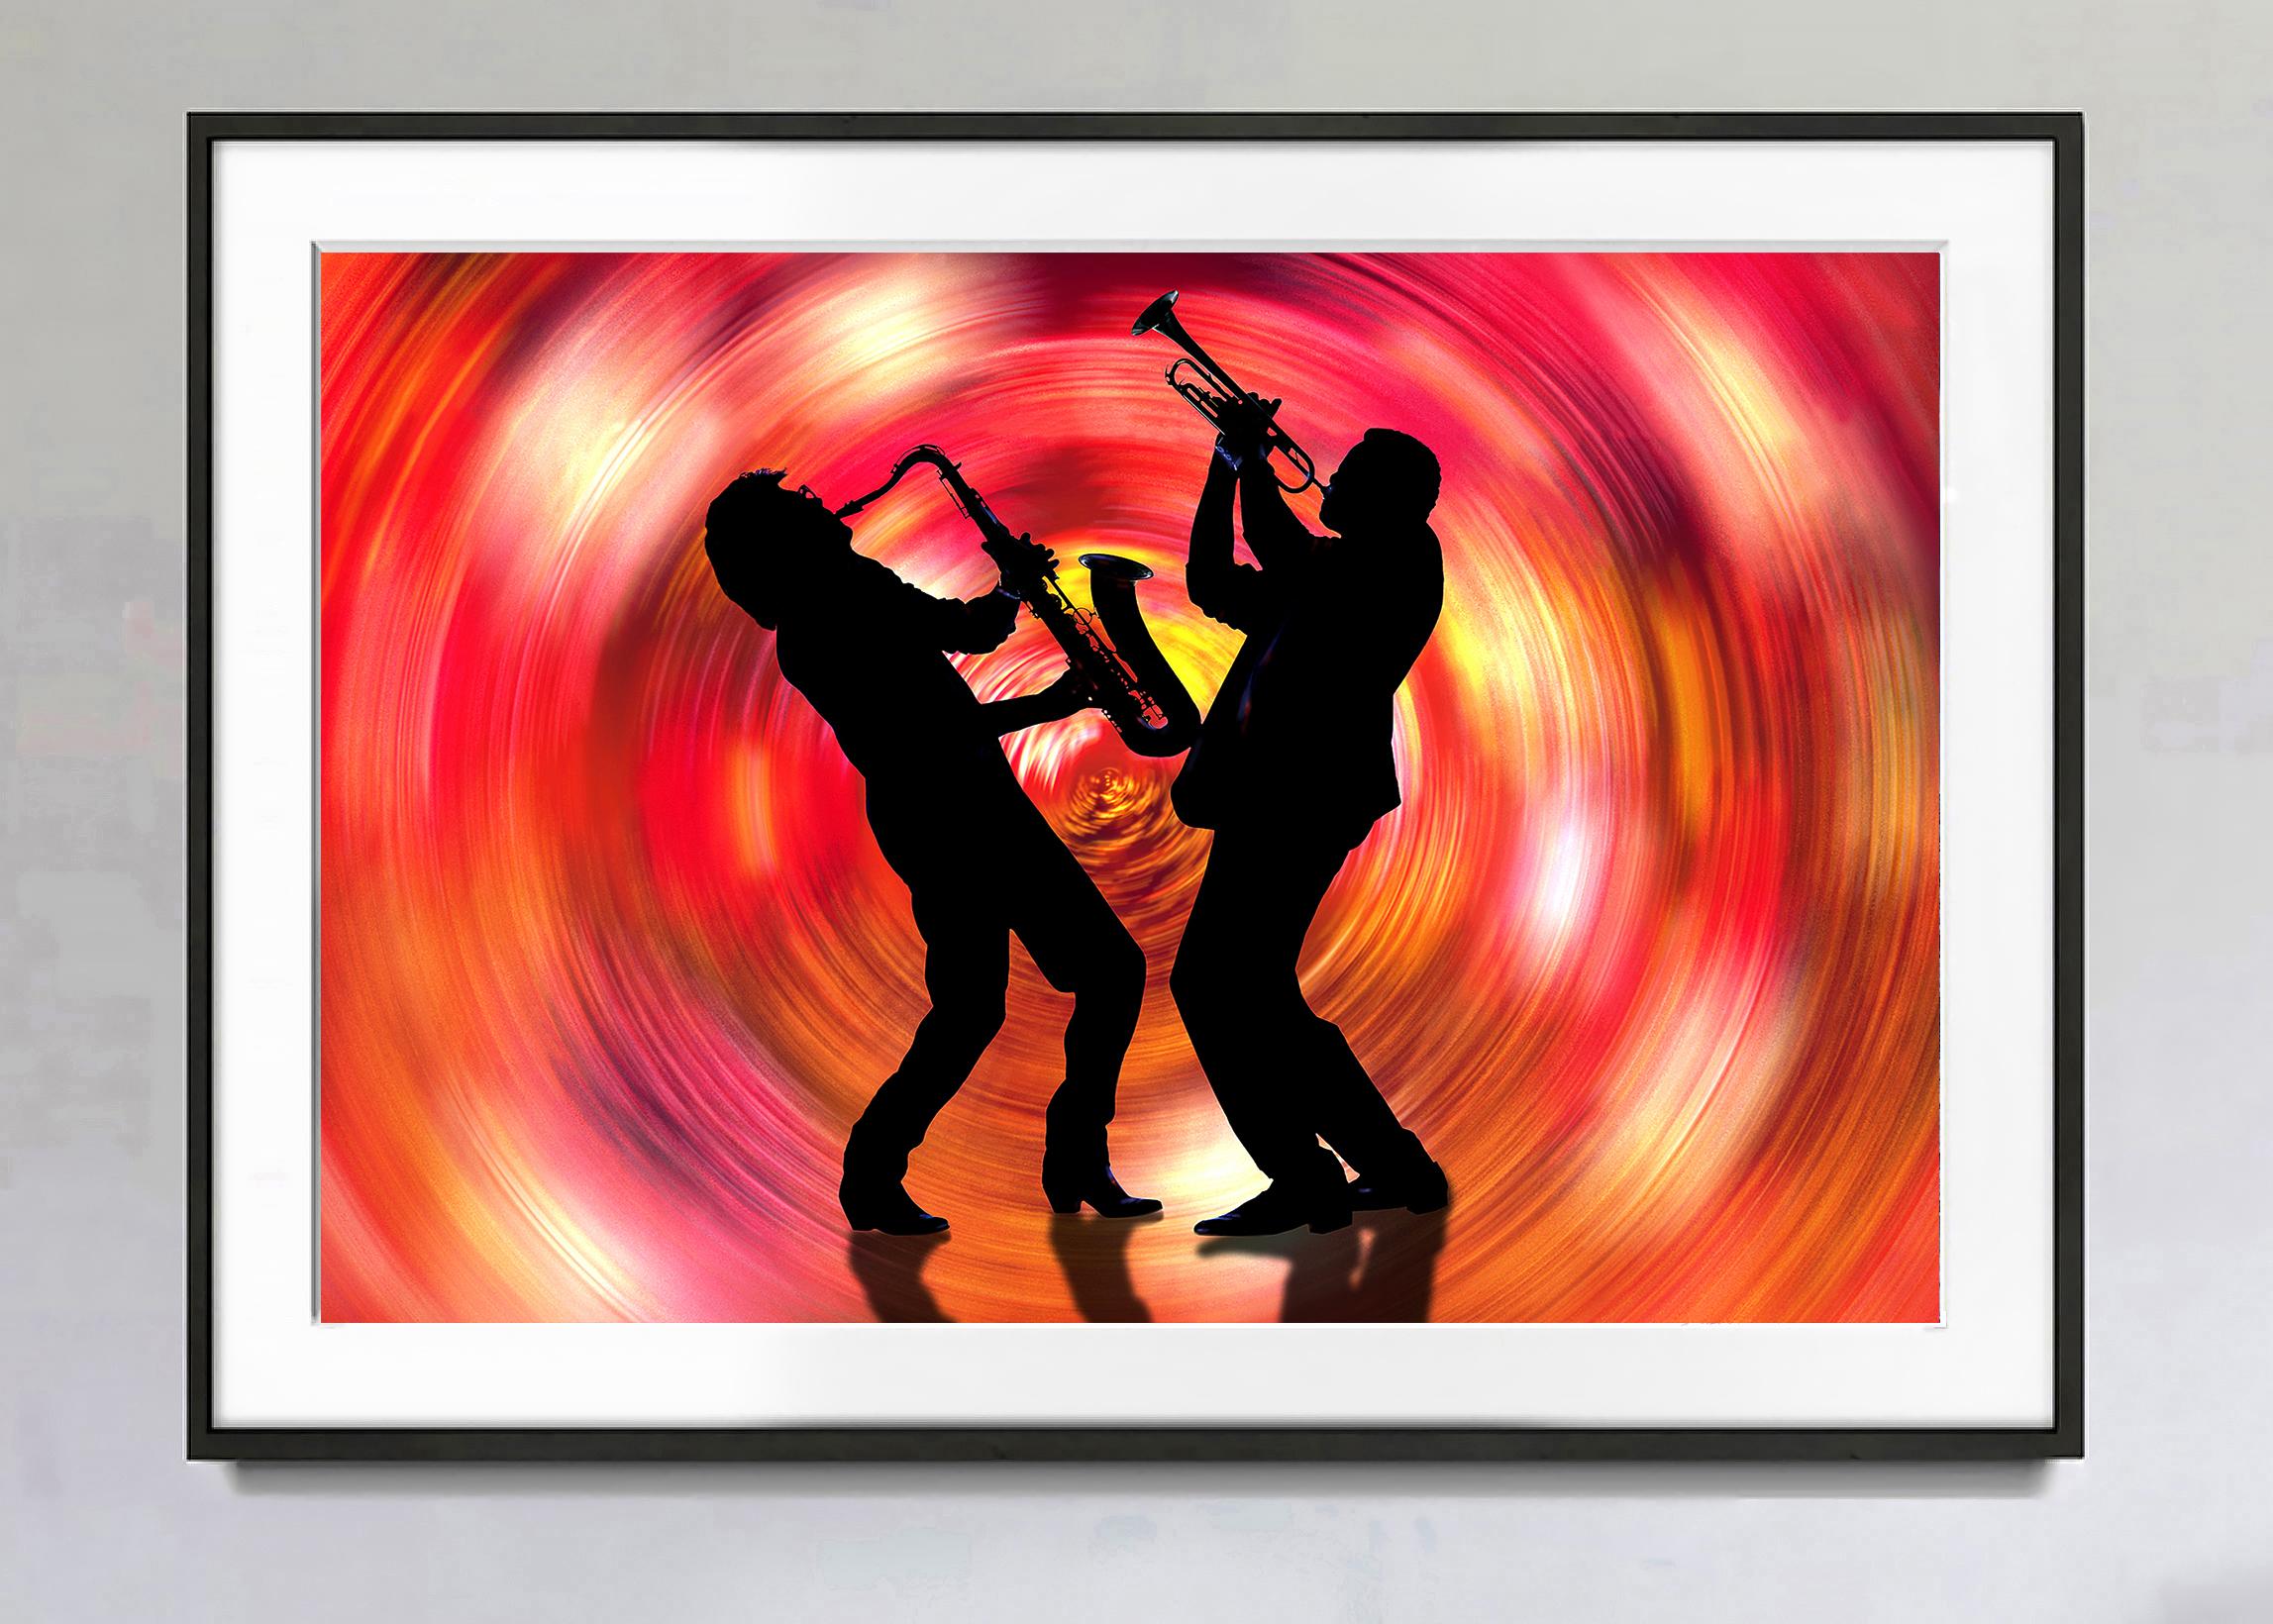 Jazz Musicians Saxophone and Trumpet Vibe in Red Swirl  - Music is Color - Contemporary Photograph by Mitchell Funk